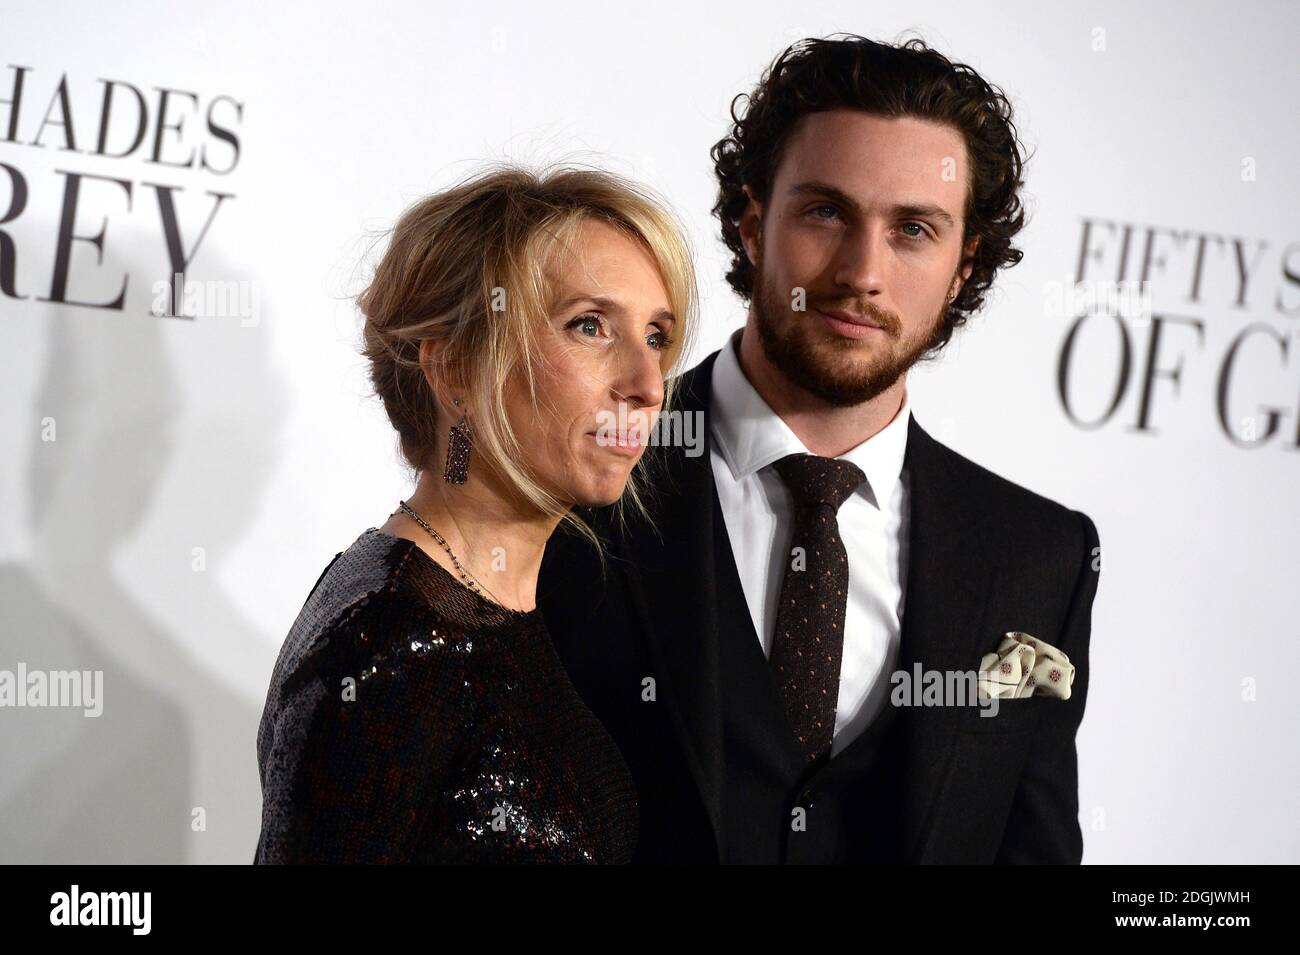 Sam Taylor-Johnson (left) and Aaron Taylor-Johnson (right) attending the UK film premiere of Fifty Shades Of Grey held at the Odeon cinema in Leicester Square, London Stock Photo